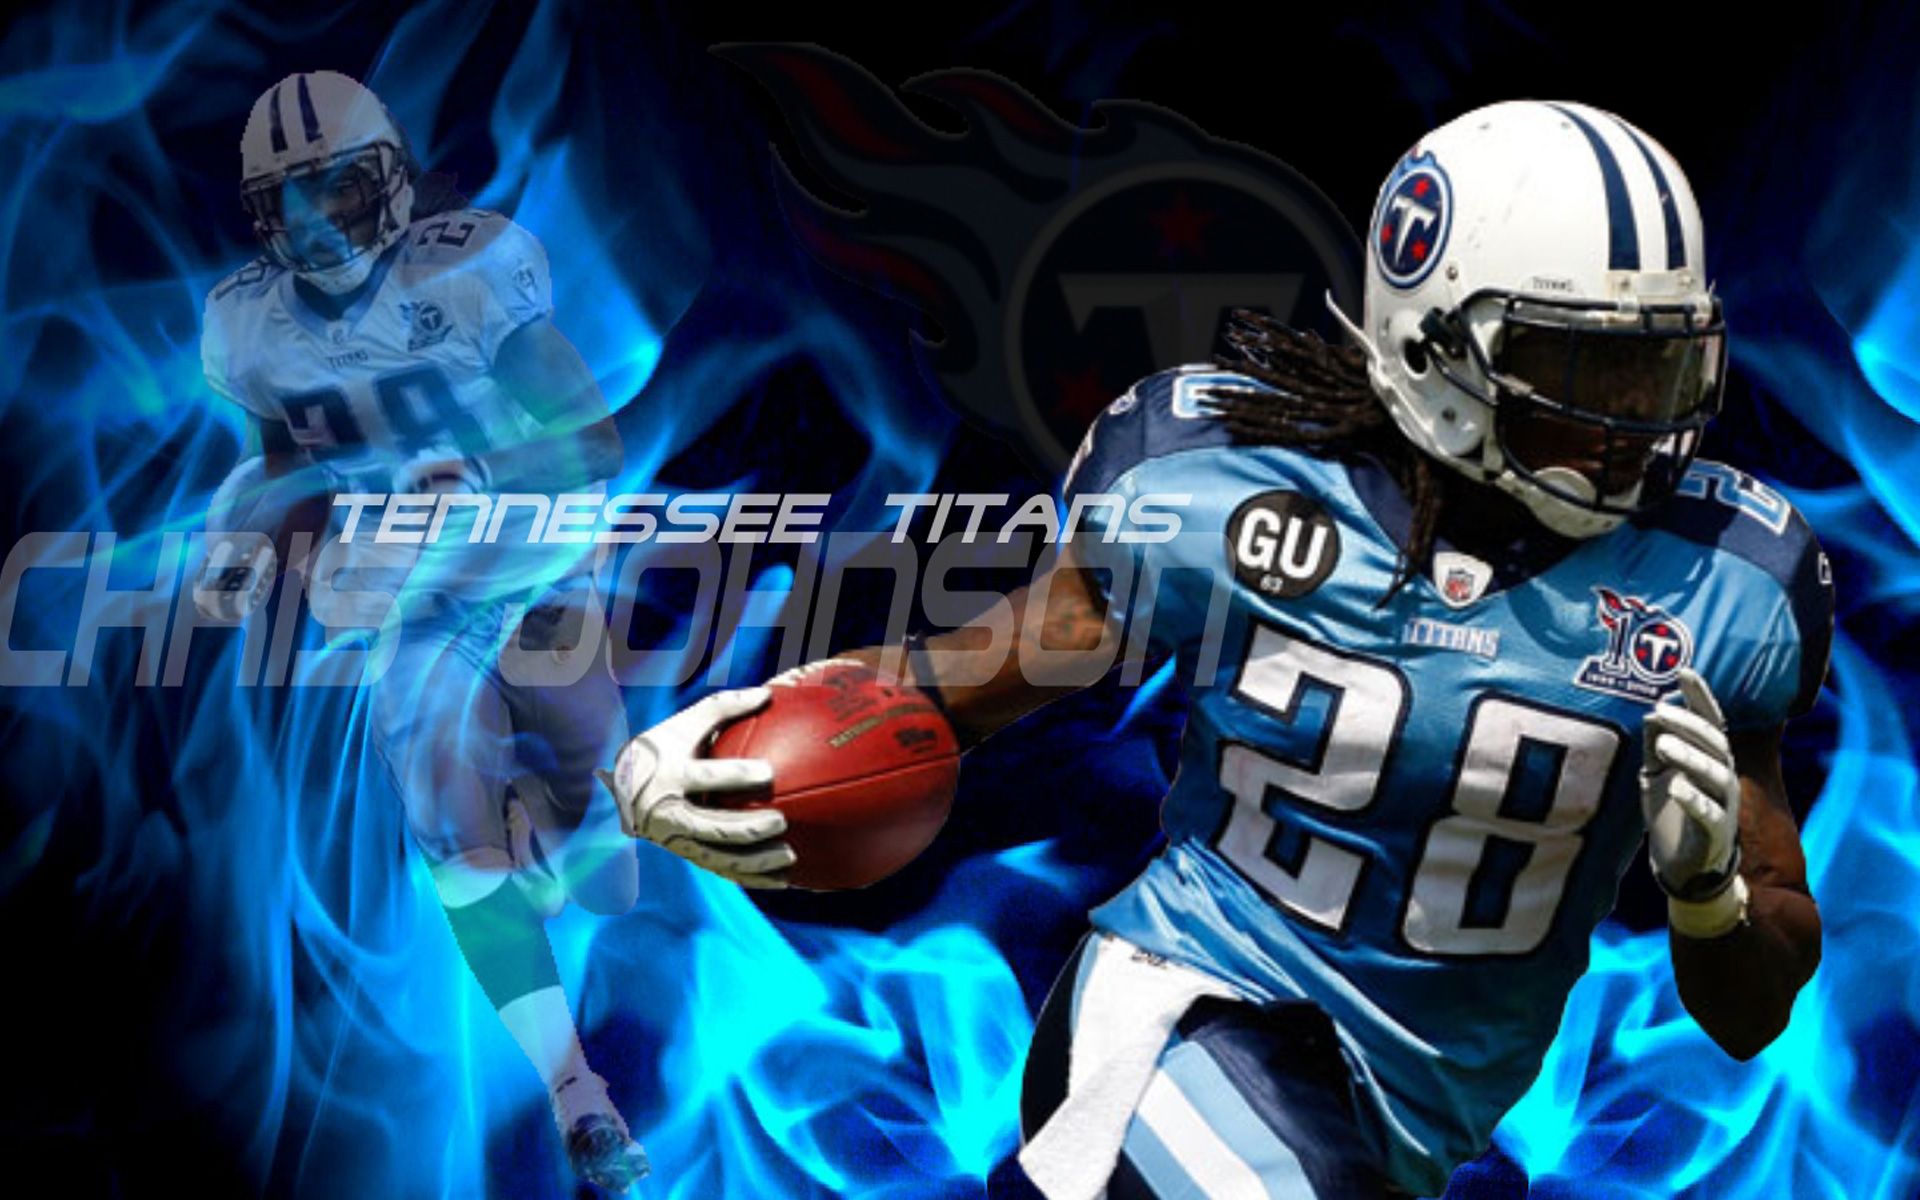 Free download TENNESSEE TITANS nfl football c wallpaper 1920x1200 158102 [1920x1200] for your Desktop, Mobile & Tablet. Explore Tennessee Titans Wallpaper Desktop. Tennessee Titans Logo Wallpaper, Free Tennessee Titans